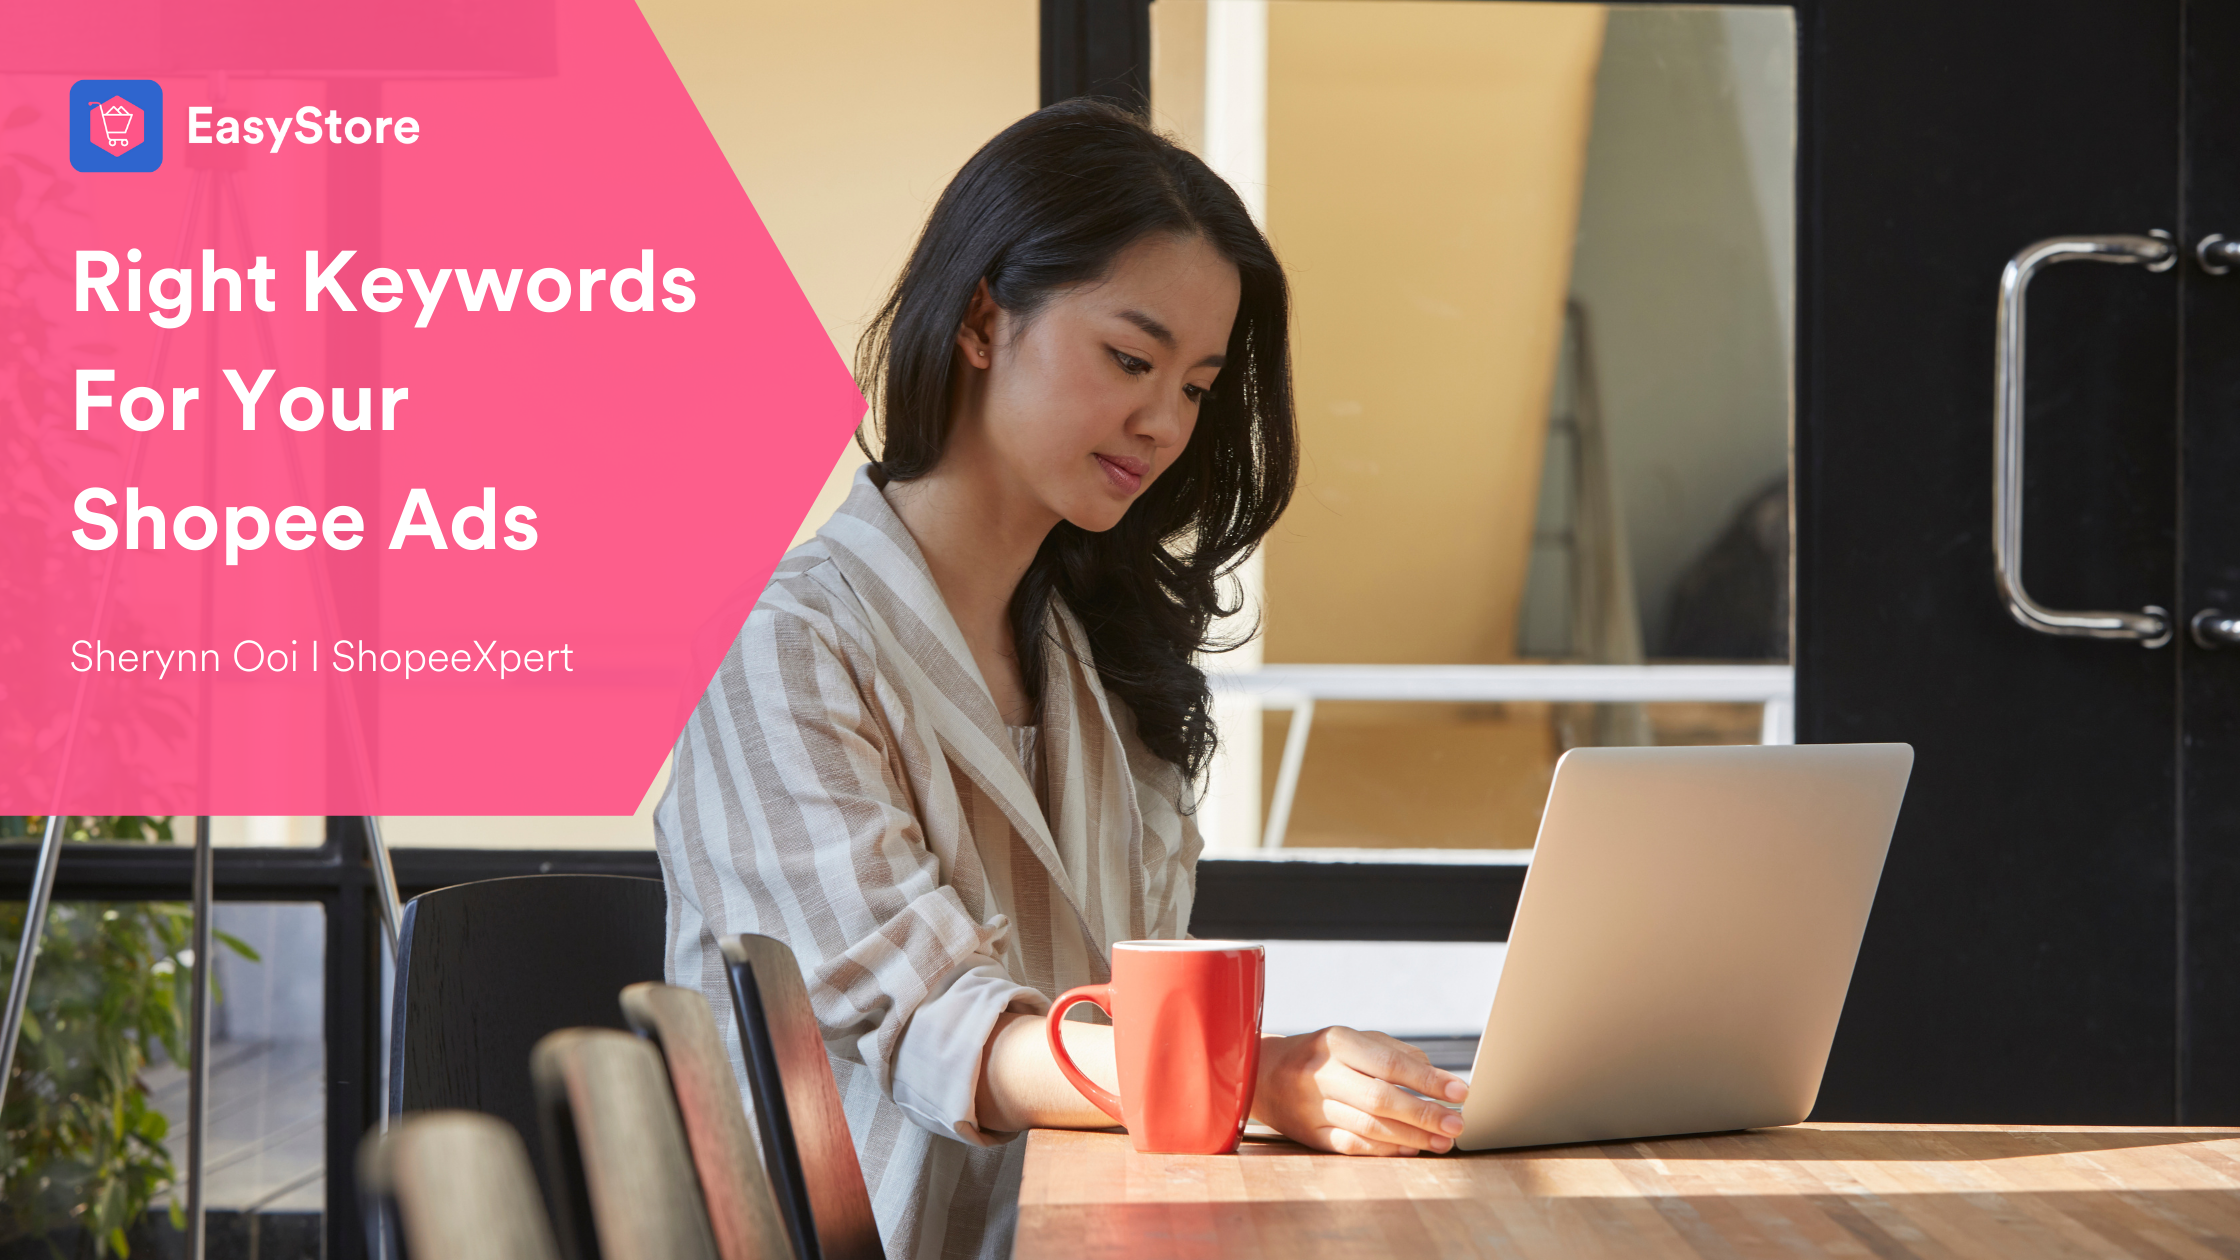 How to Choose The Right Keywords For Your Shopee Ads | EasyStore